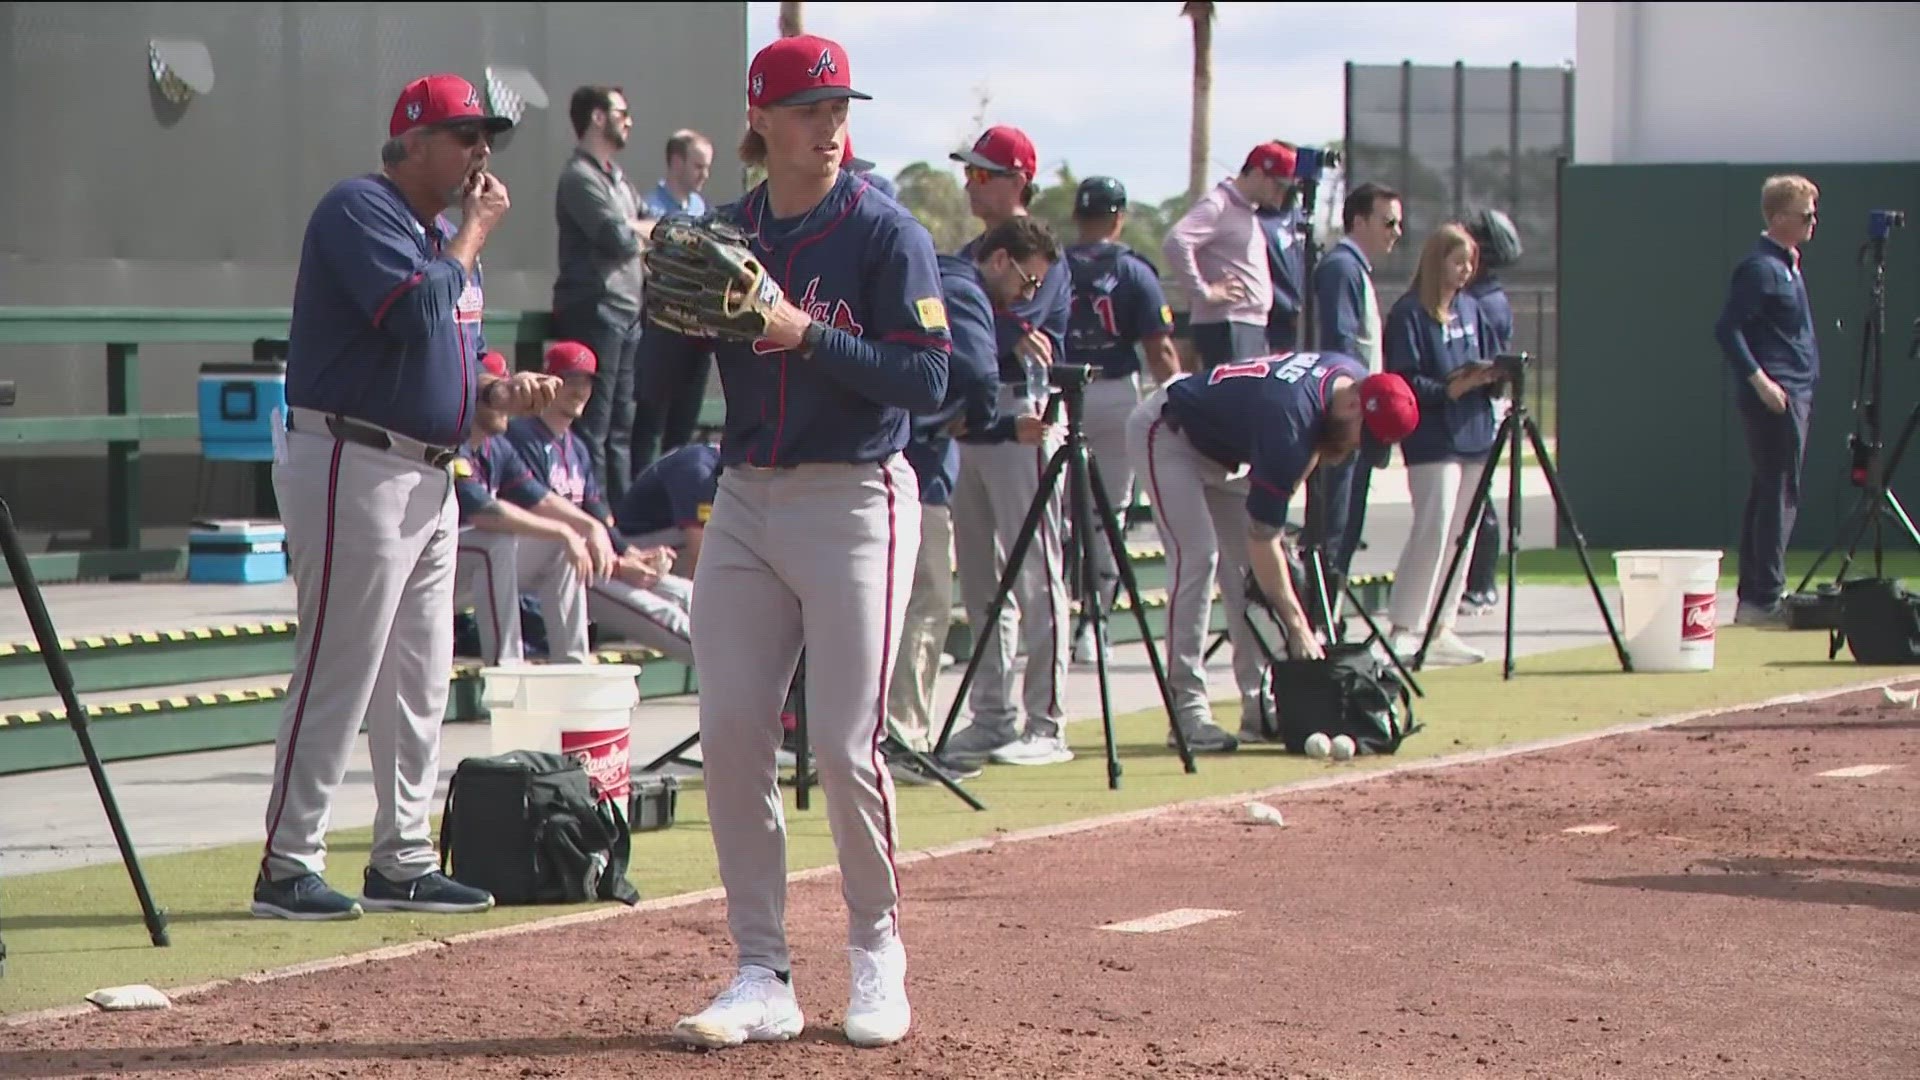 The Braves drafted pitcher Hurston Waldrep in the first round last year. 11Alive's Maria Martin spoke with him about how his first big league camp is going.